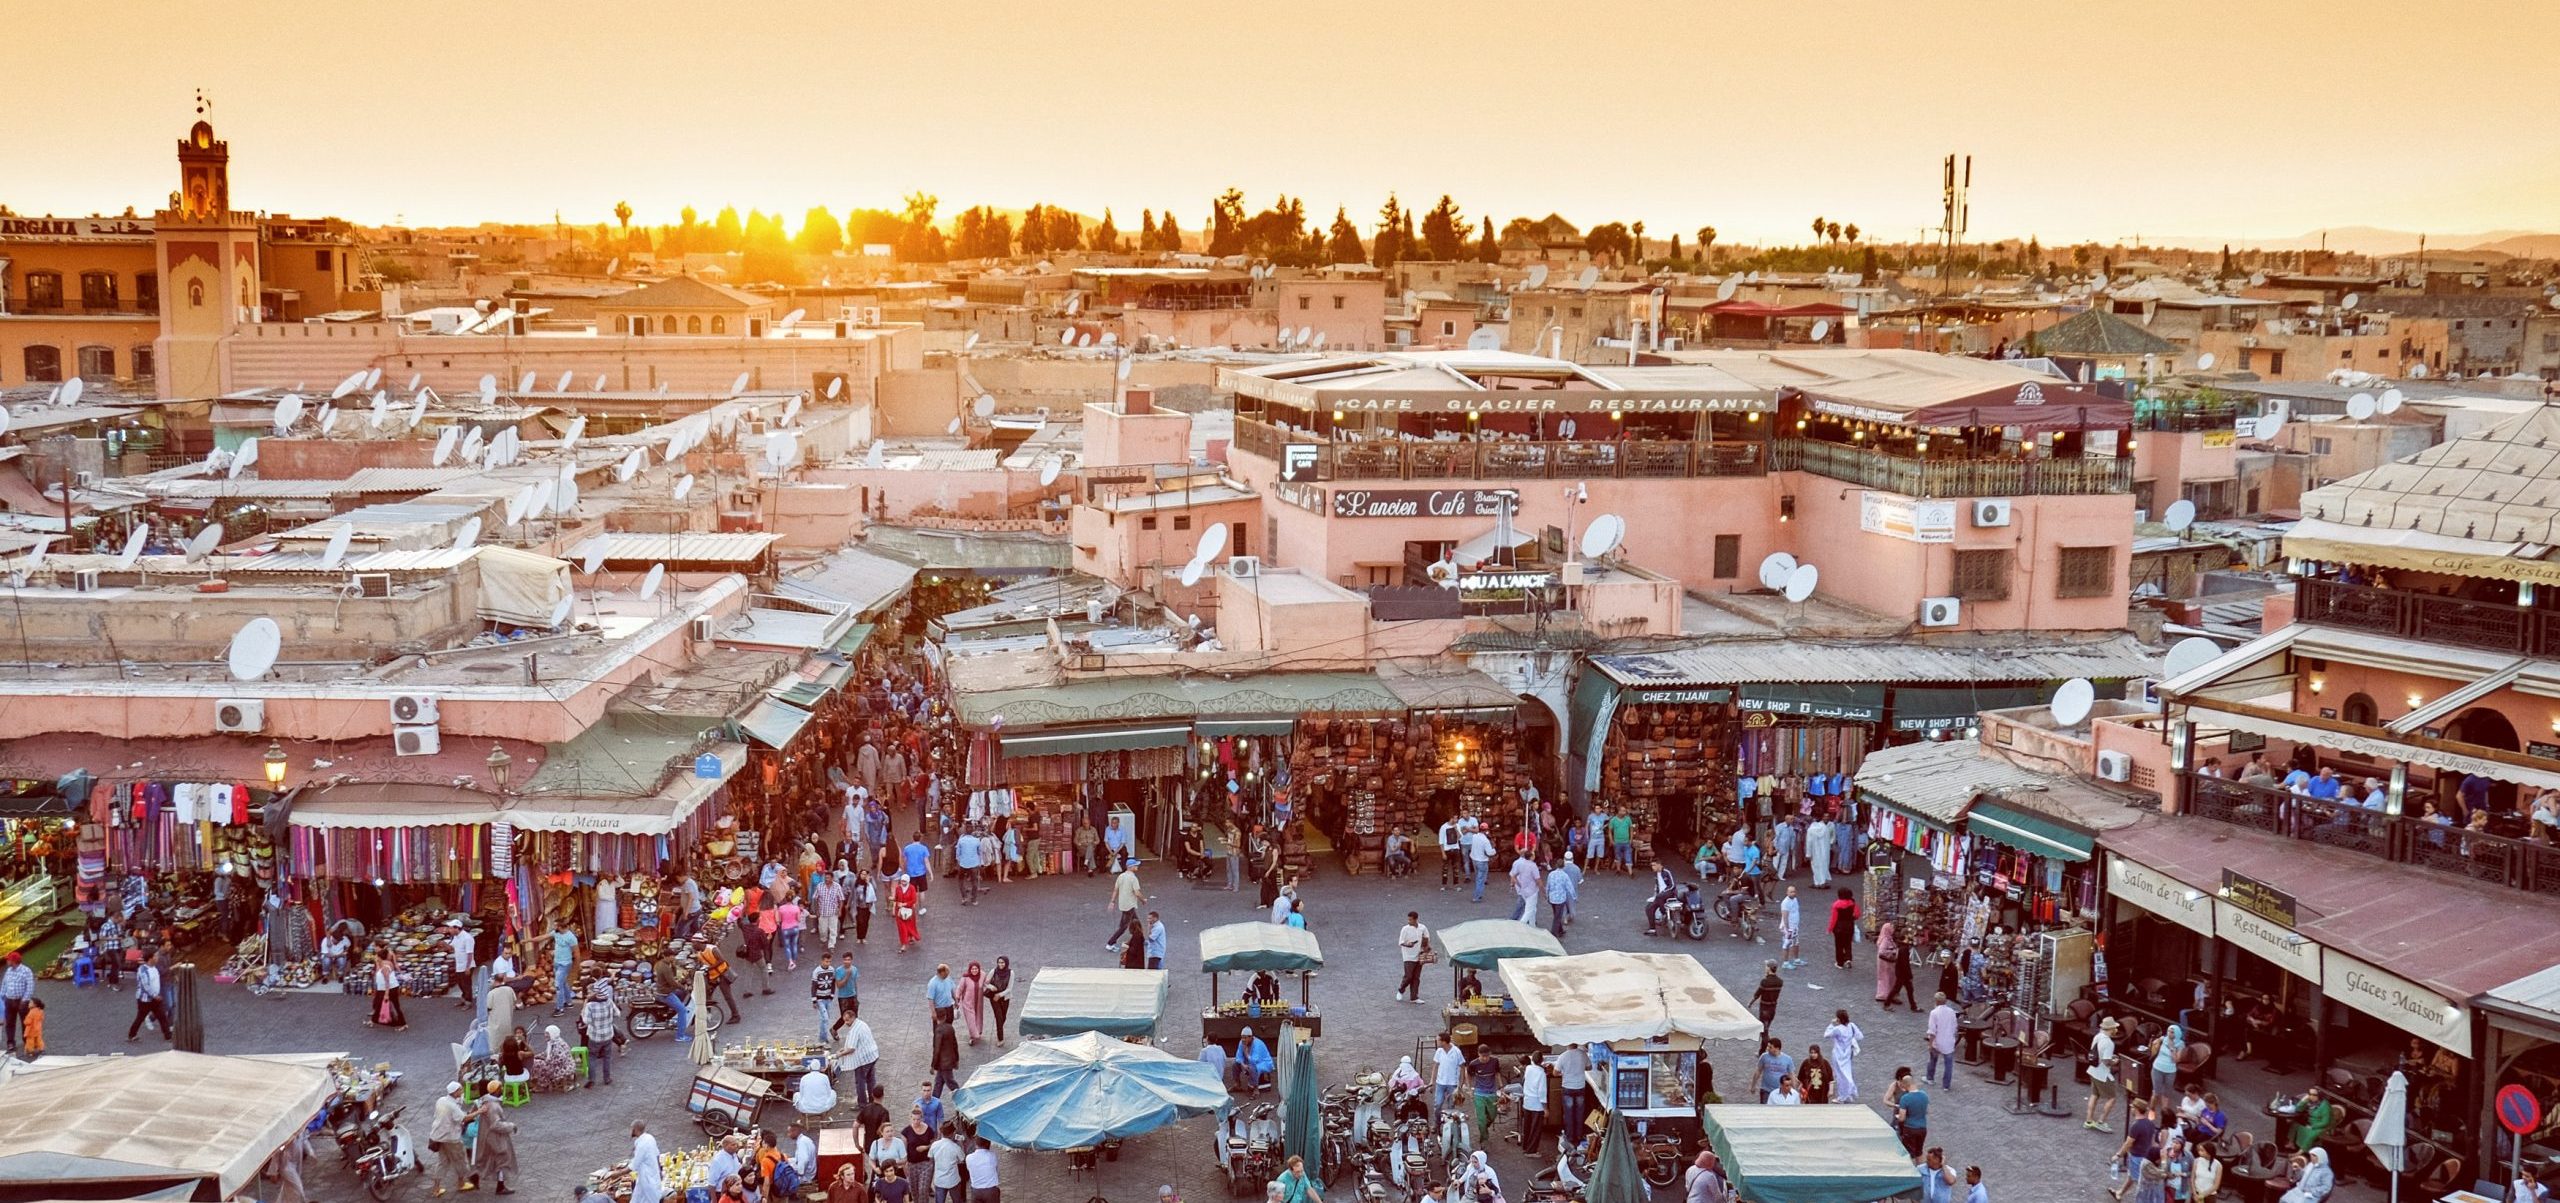 Top things to do in Marrakech - ShinStories